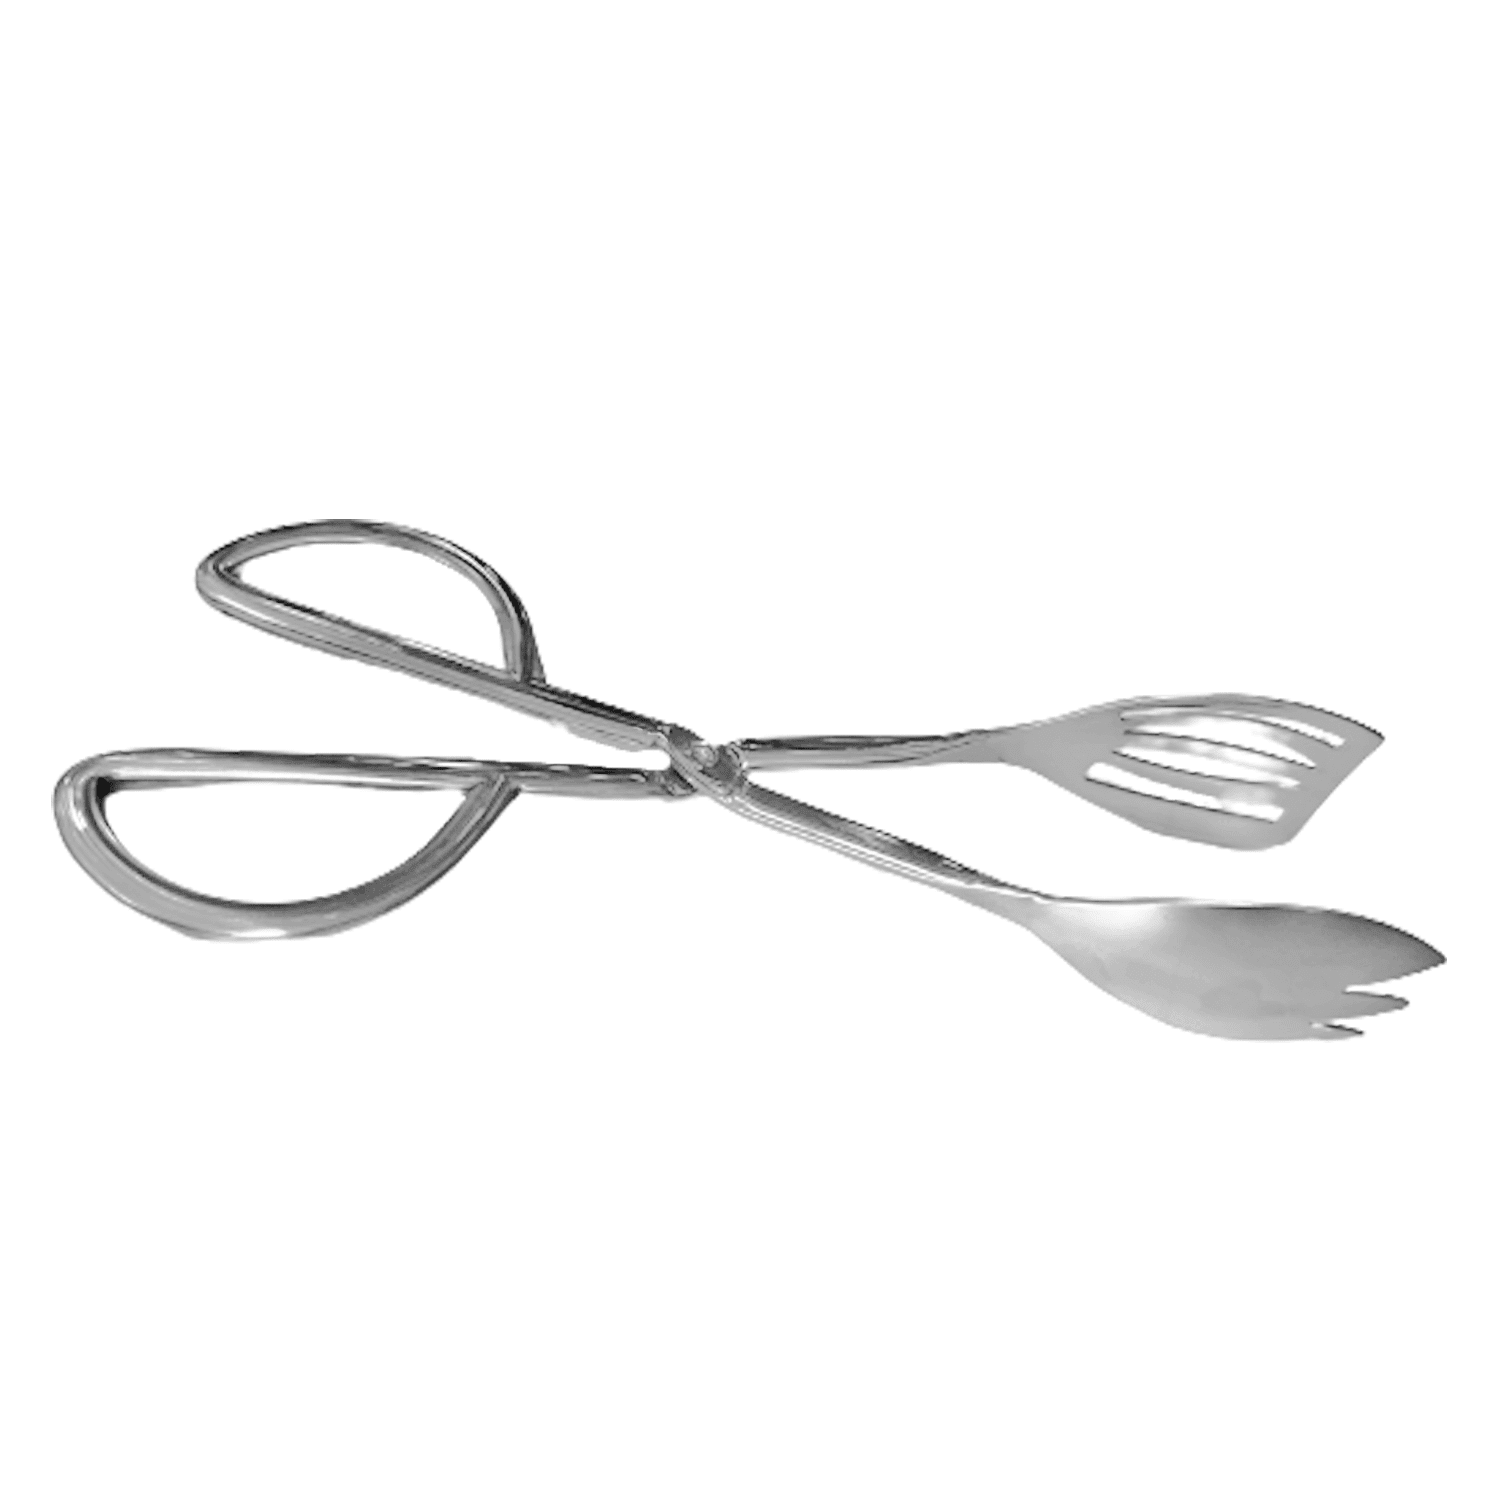 Cat Paw Salad Tongs – Whisk and Widget